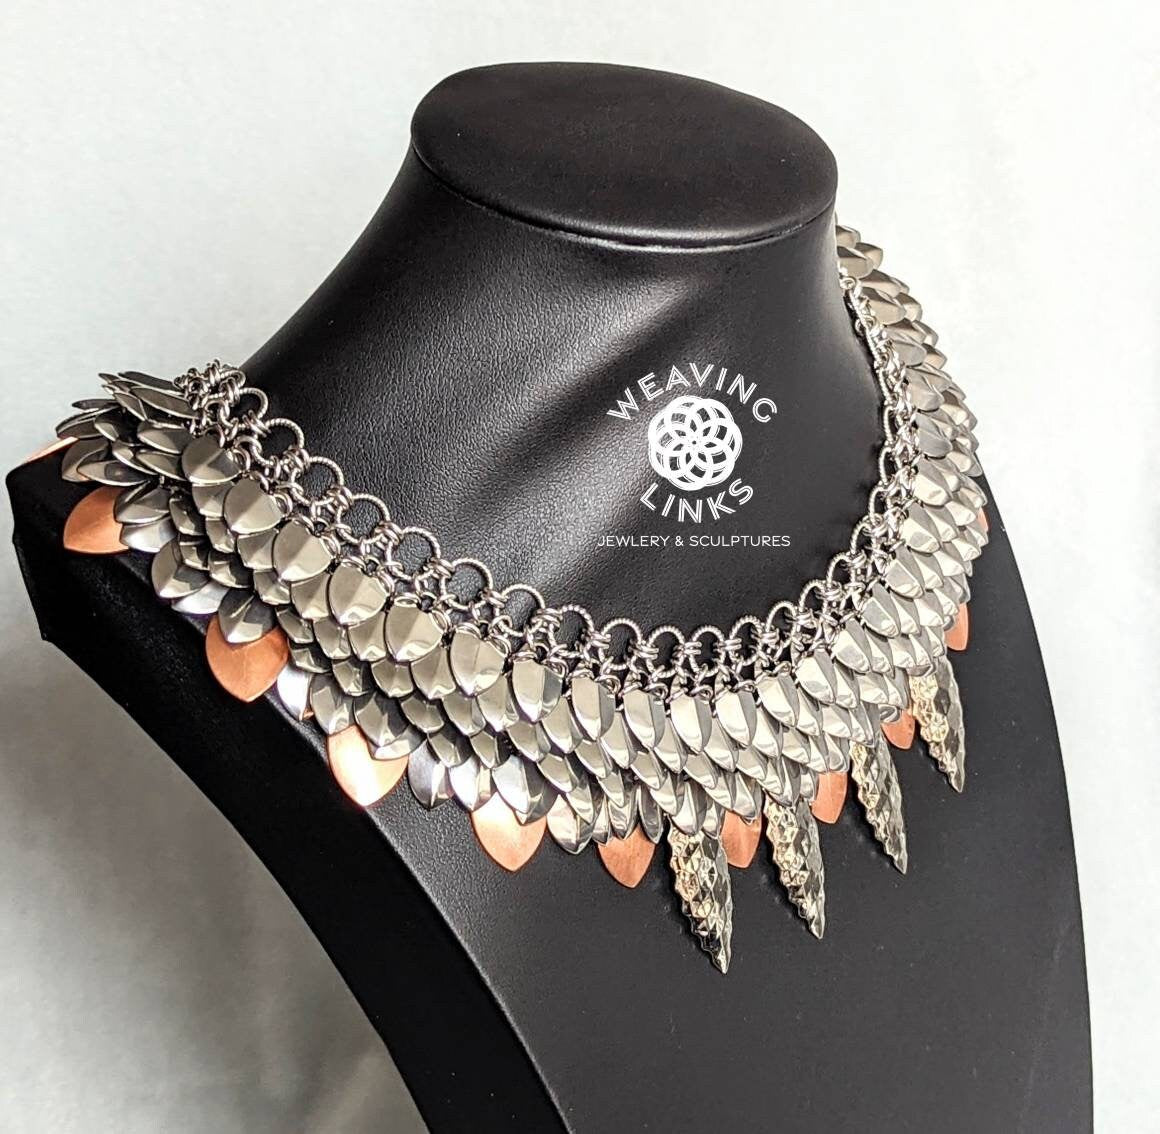 Autumnal Collar-style Necklace